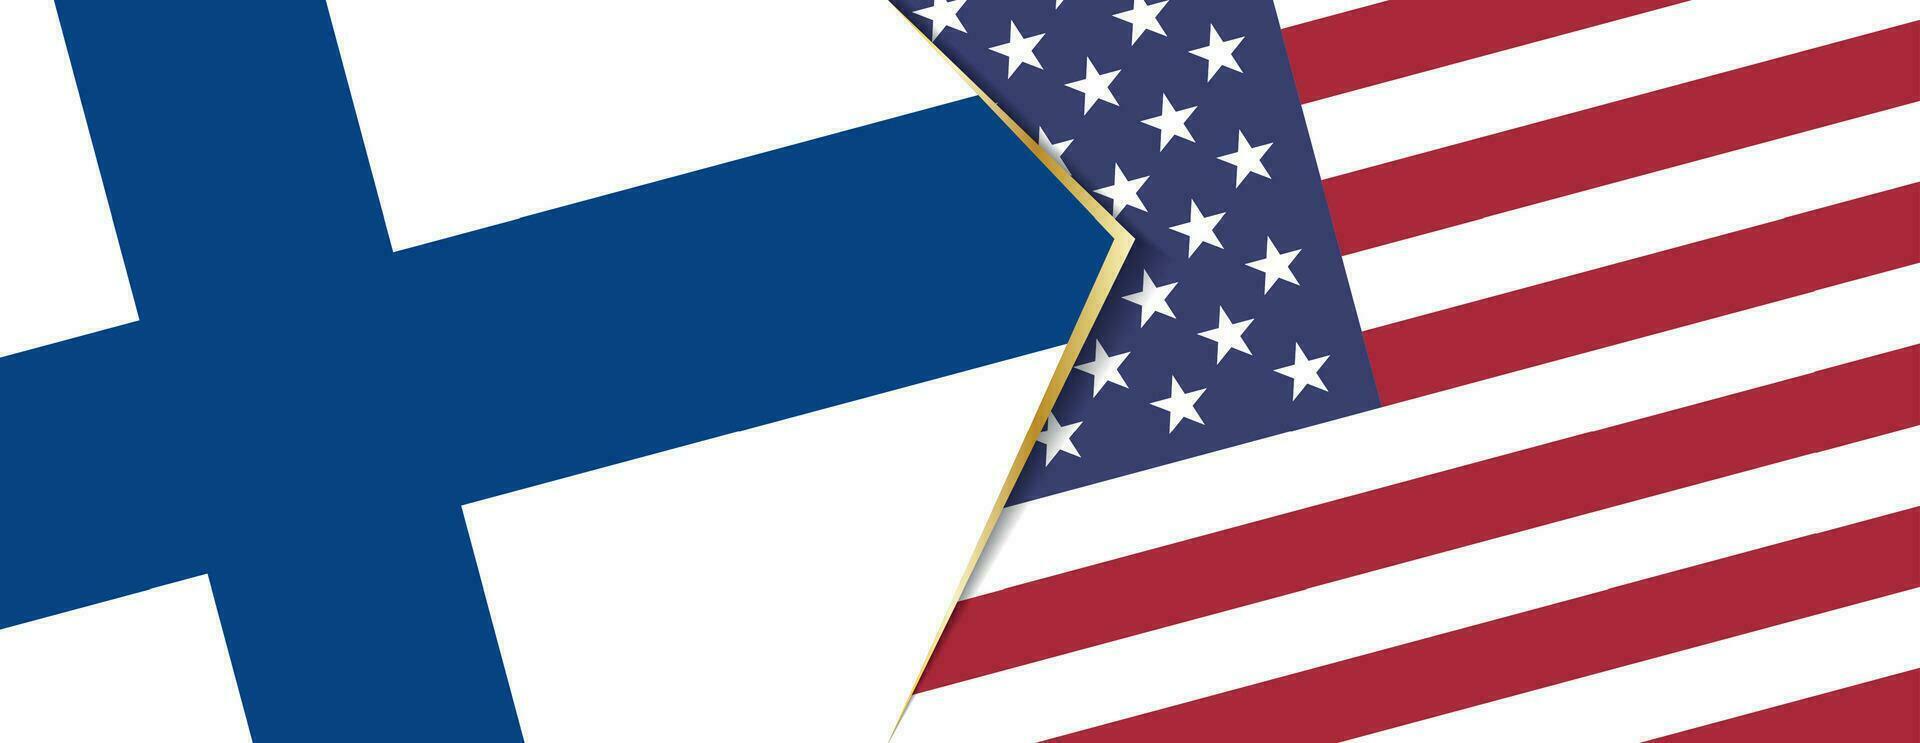 Finland and USA flags, two vector flags.